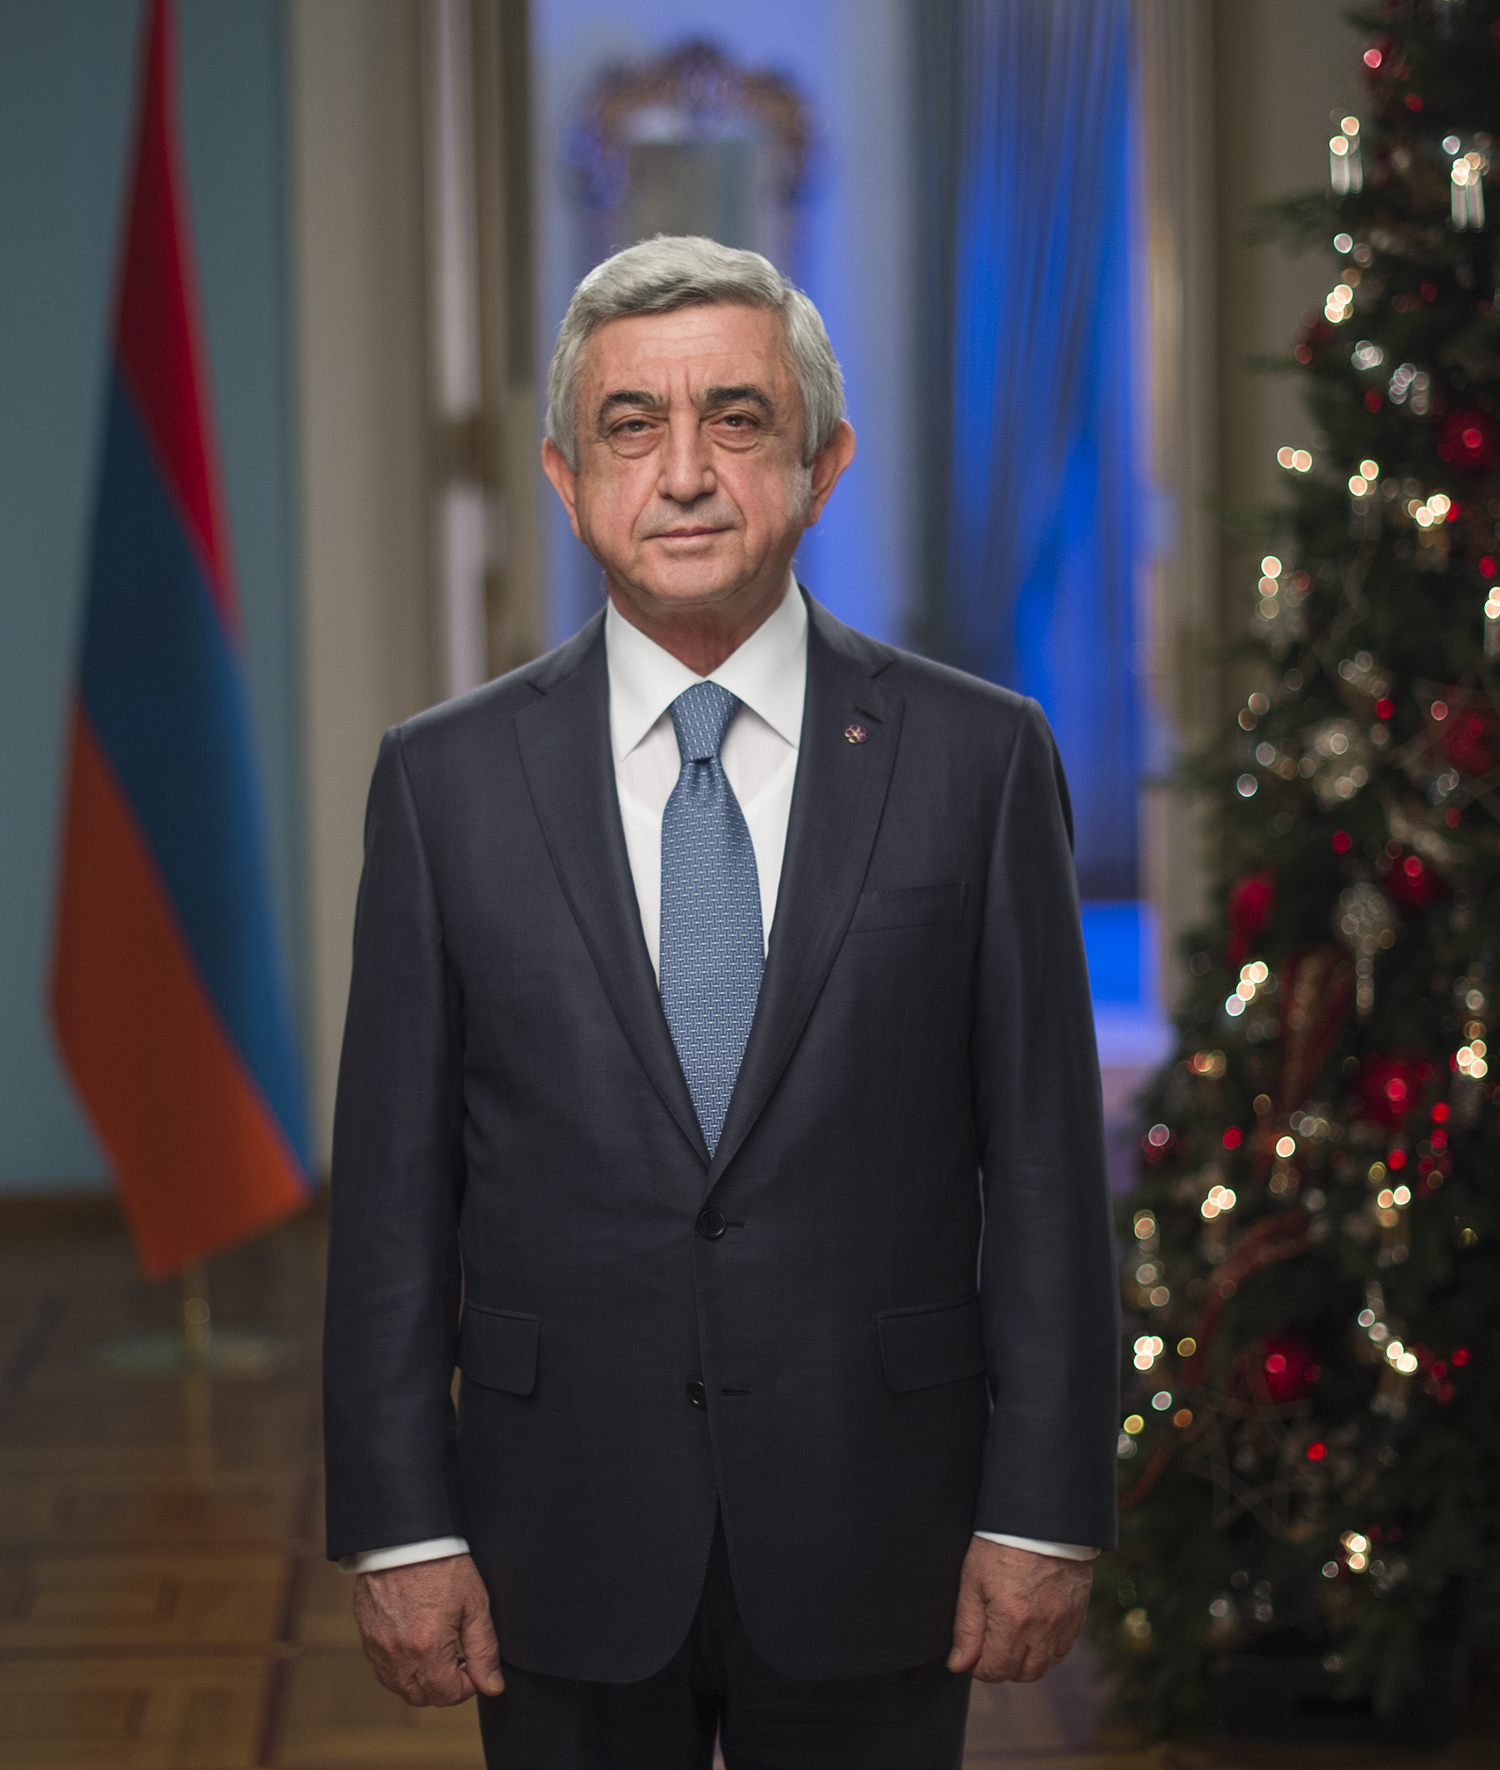 Congratulatory message by President Serzh Sargsyan on the occasion of New Year and Christmas holidays